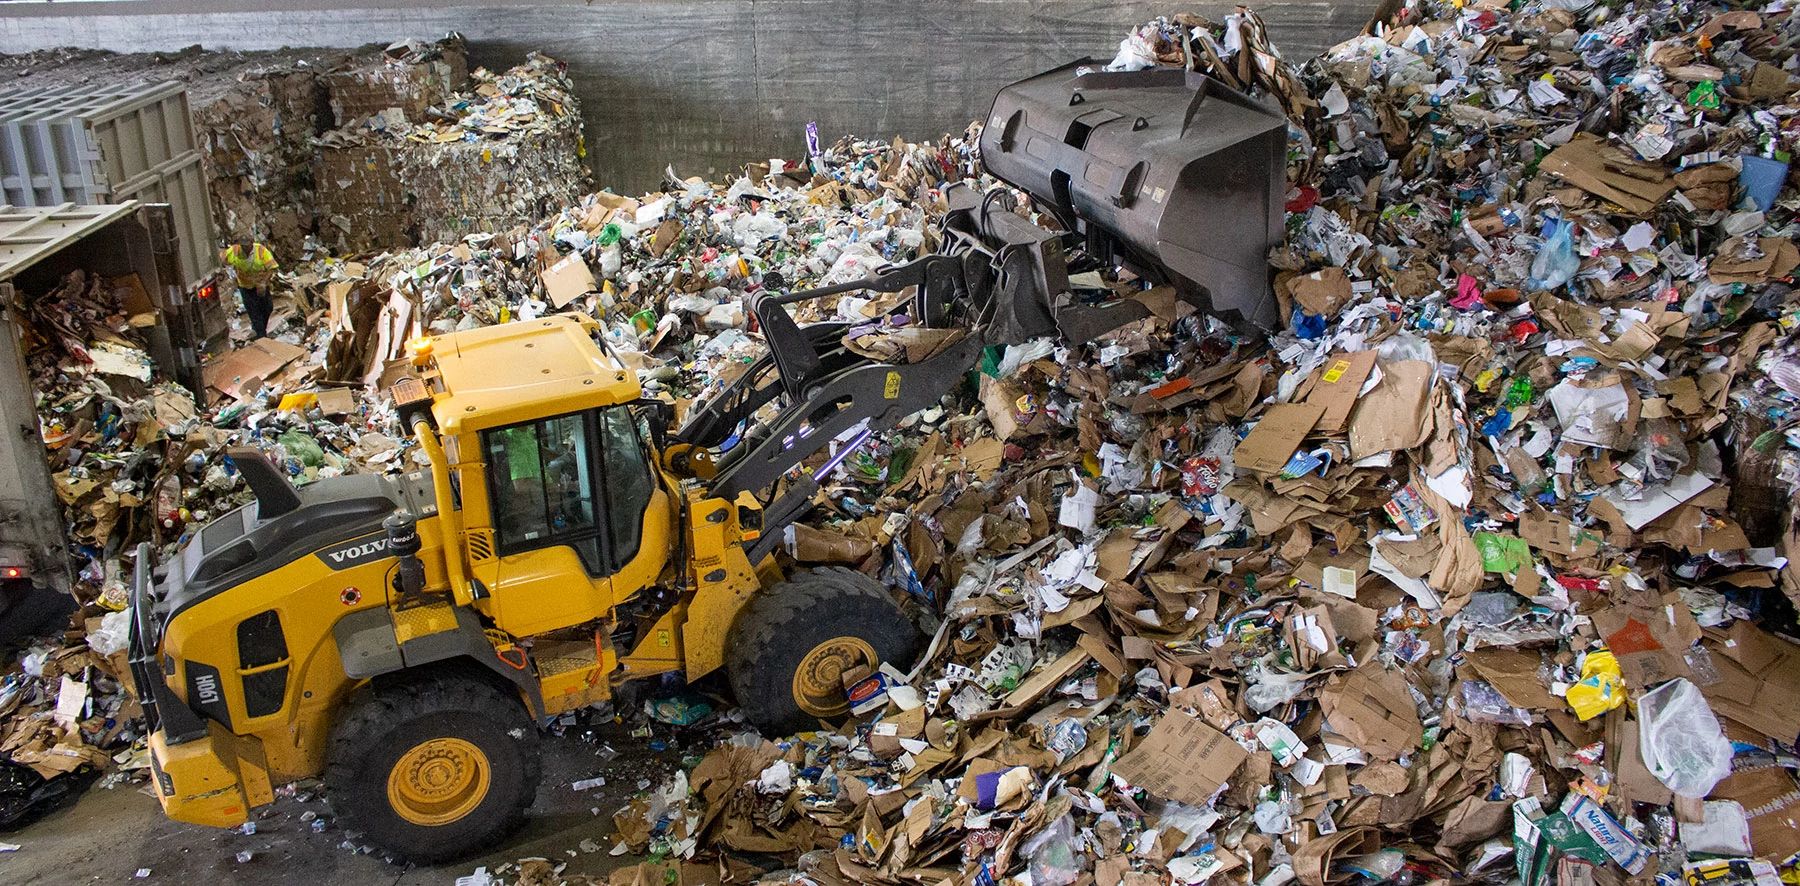 Heavy equipment scoops up a pile of recyclables in a recycling center